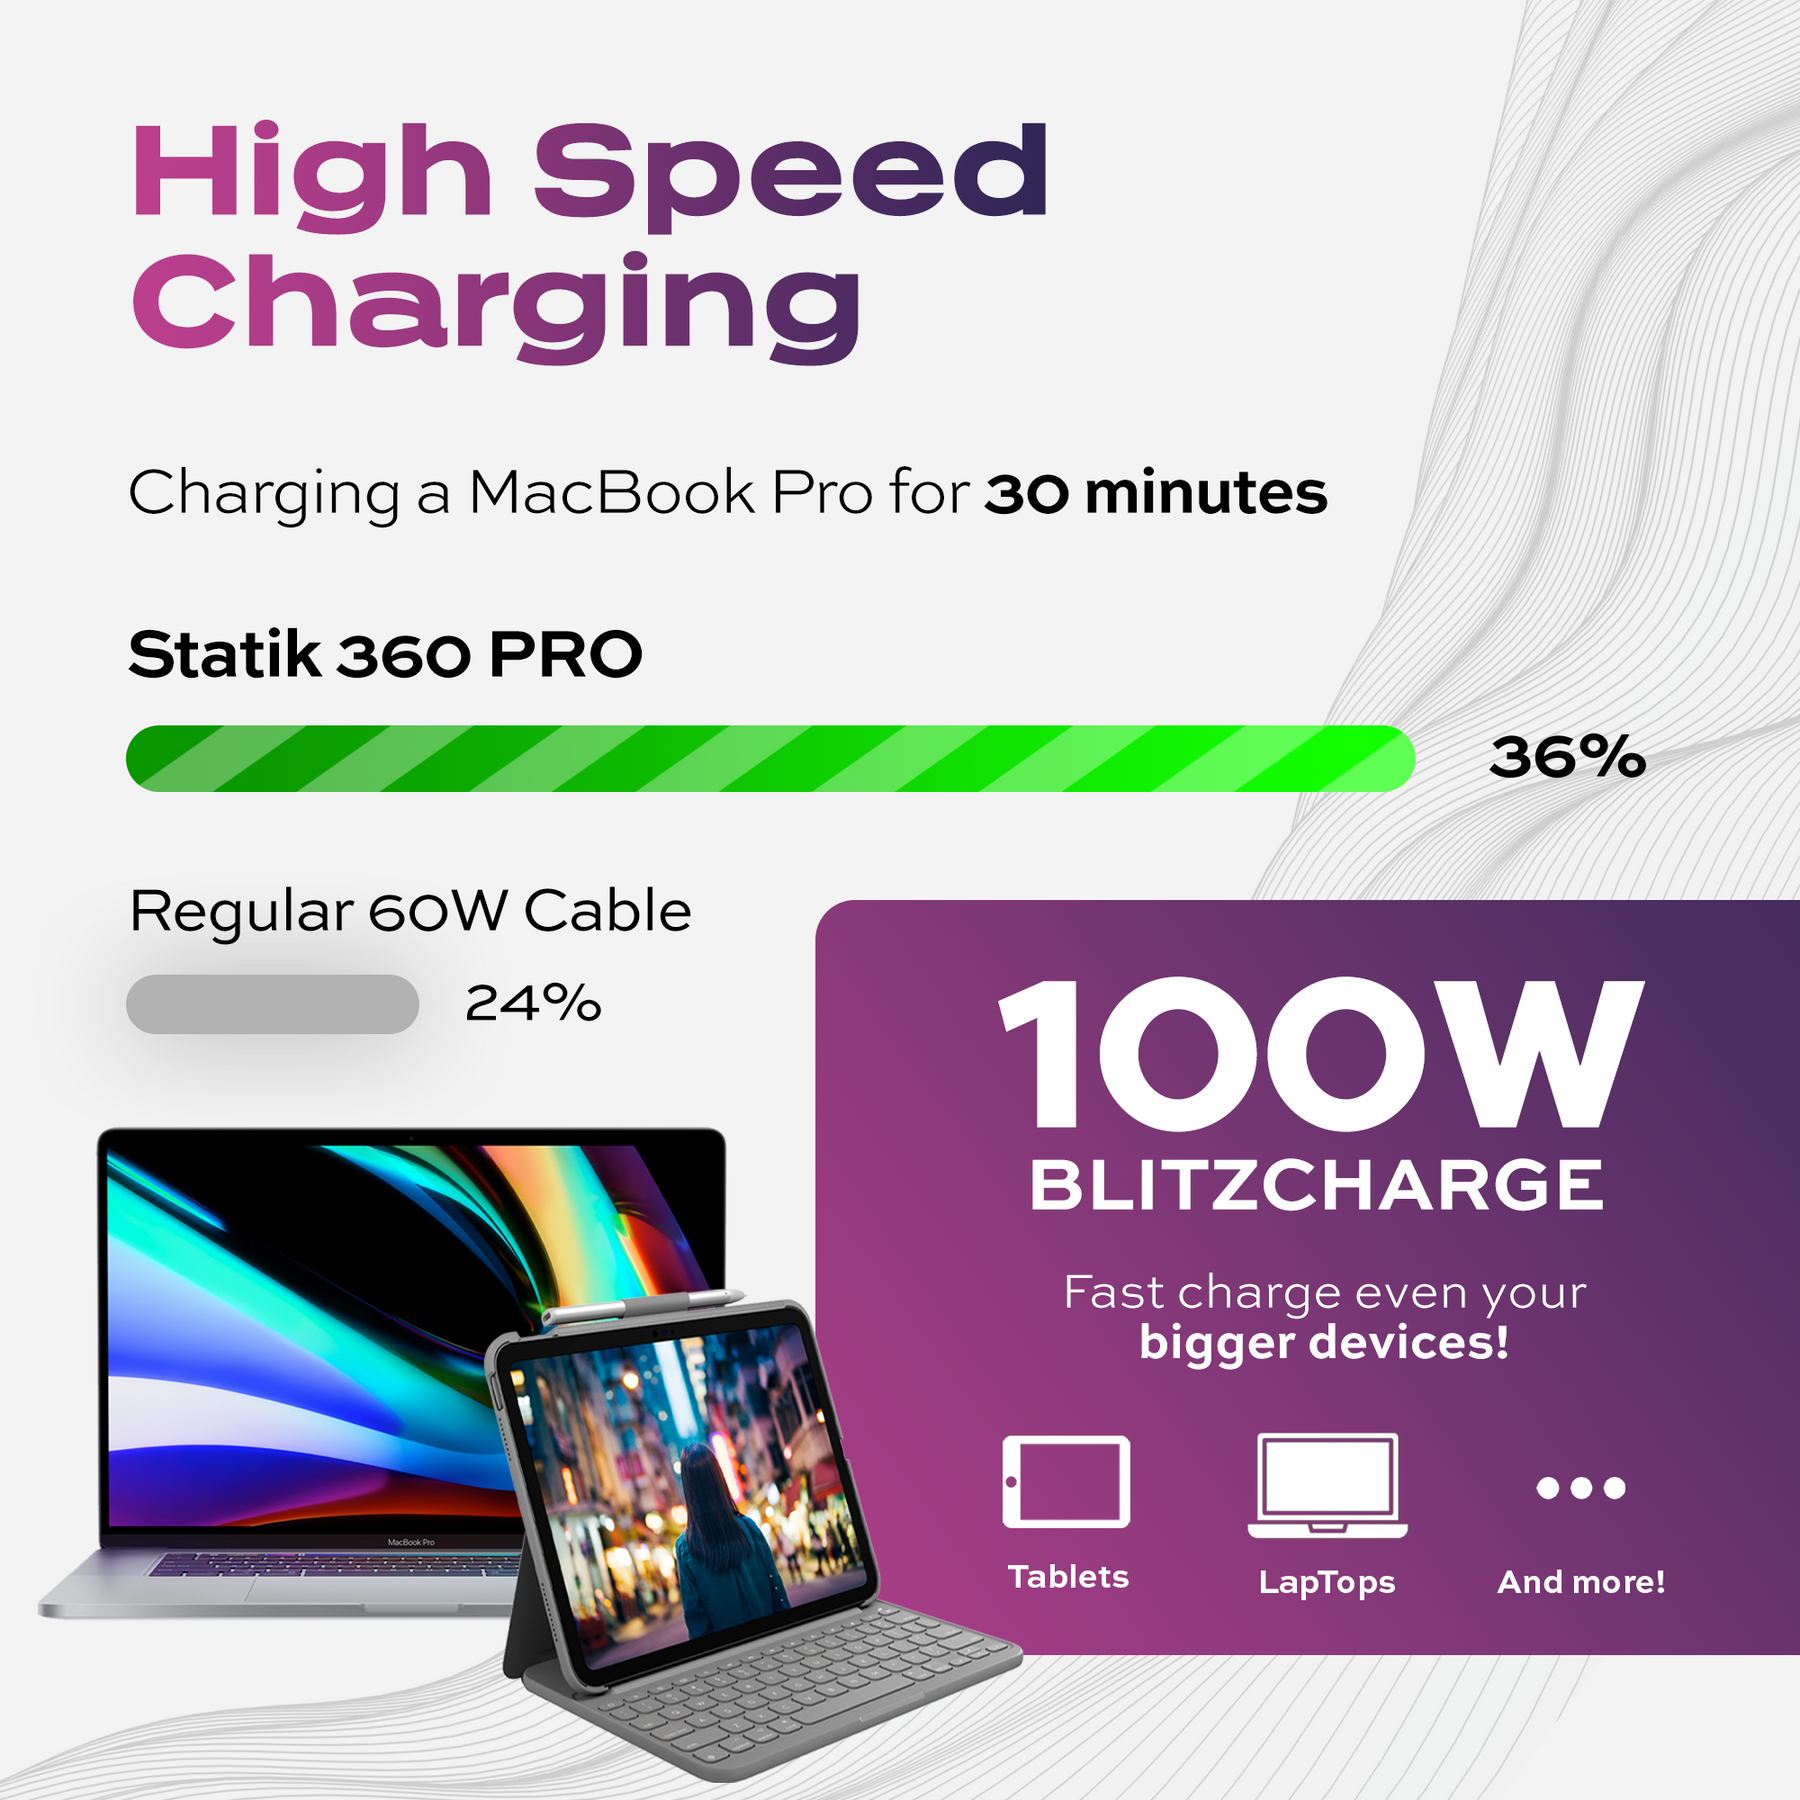 Save 15% on the Statik 360 Pro Universal Charging Cable - Reviewed